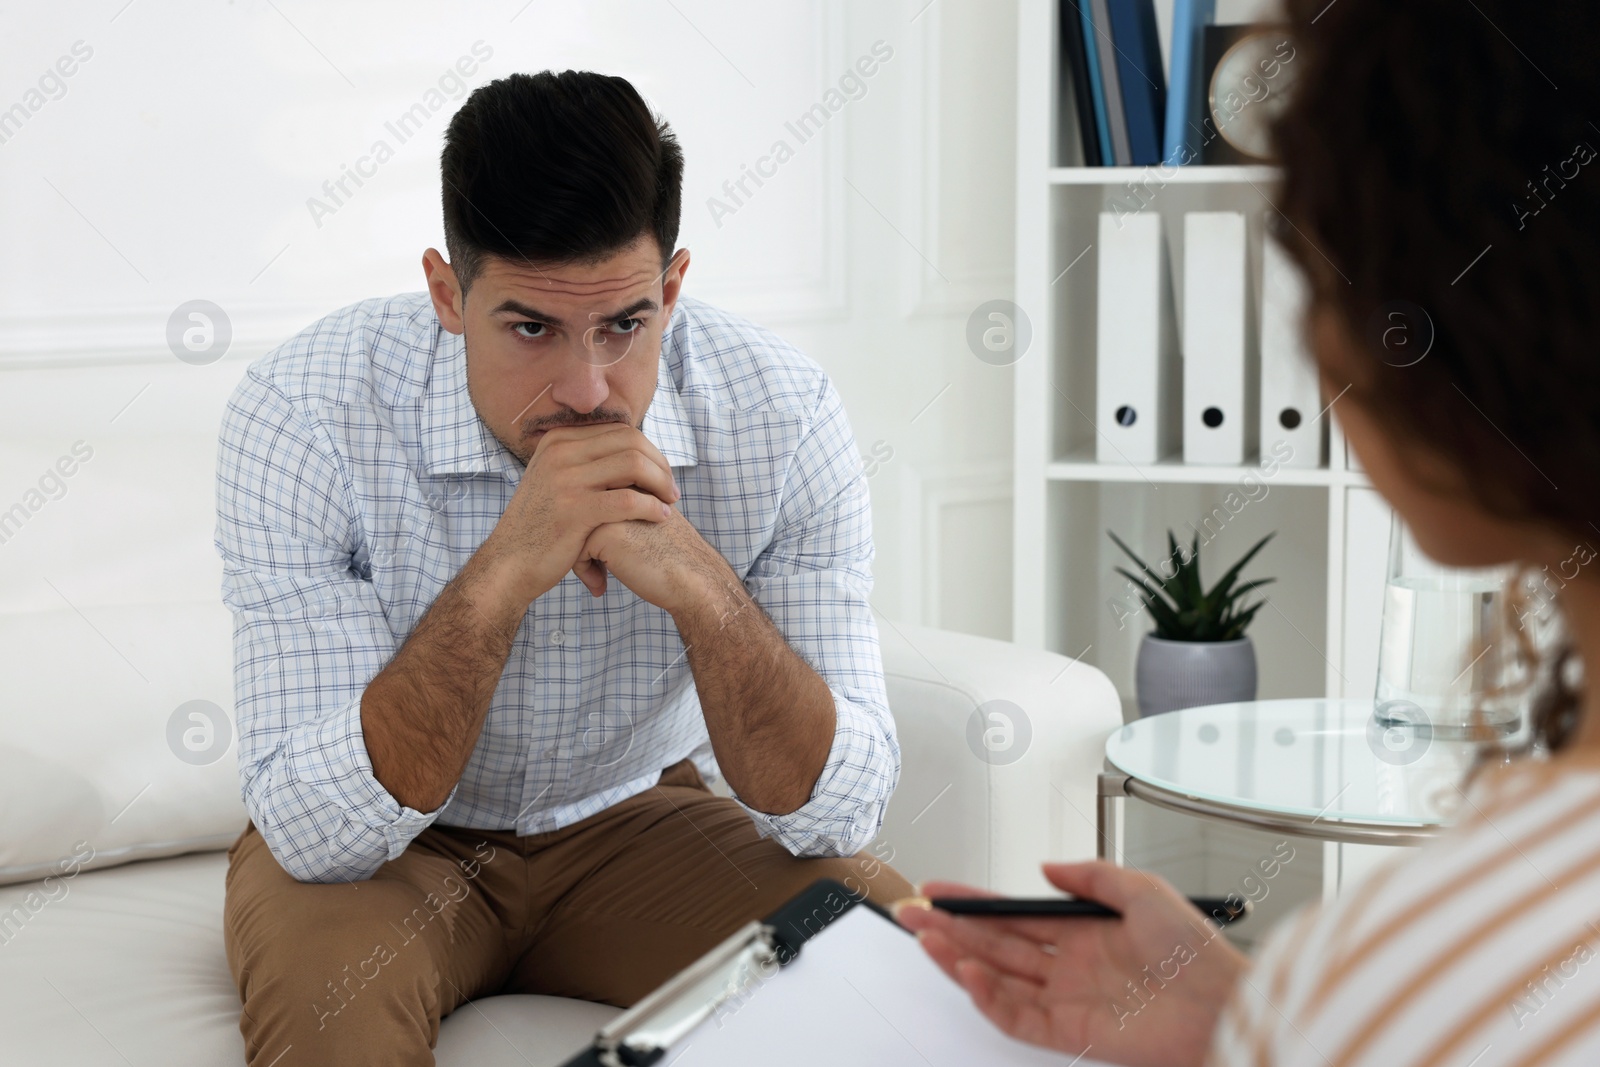 Photo of Unhappy man having session with his therapist indoors